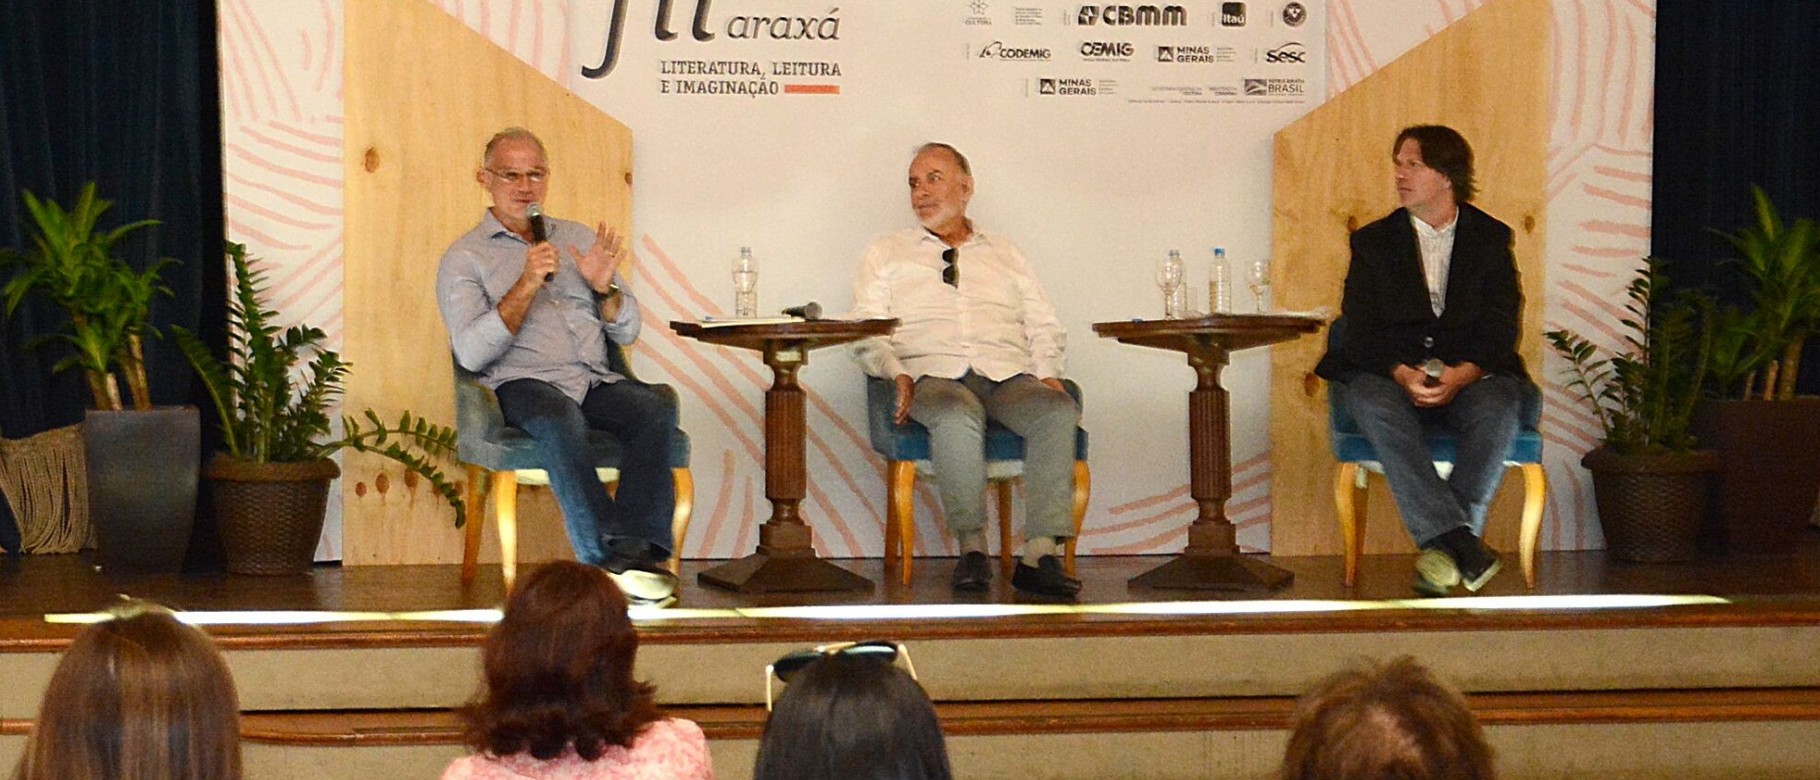 Steven Byrd recently traveled to Brazil to take part in one of the country's largest literary festivals 